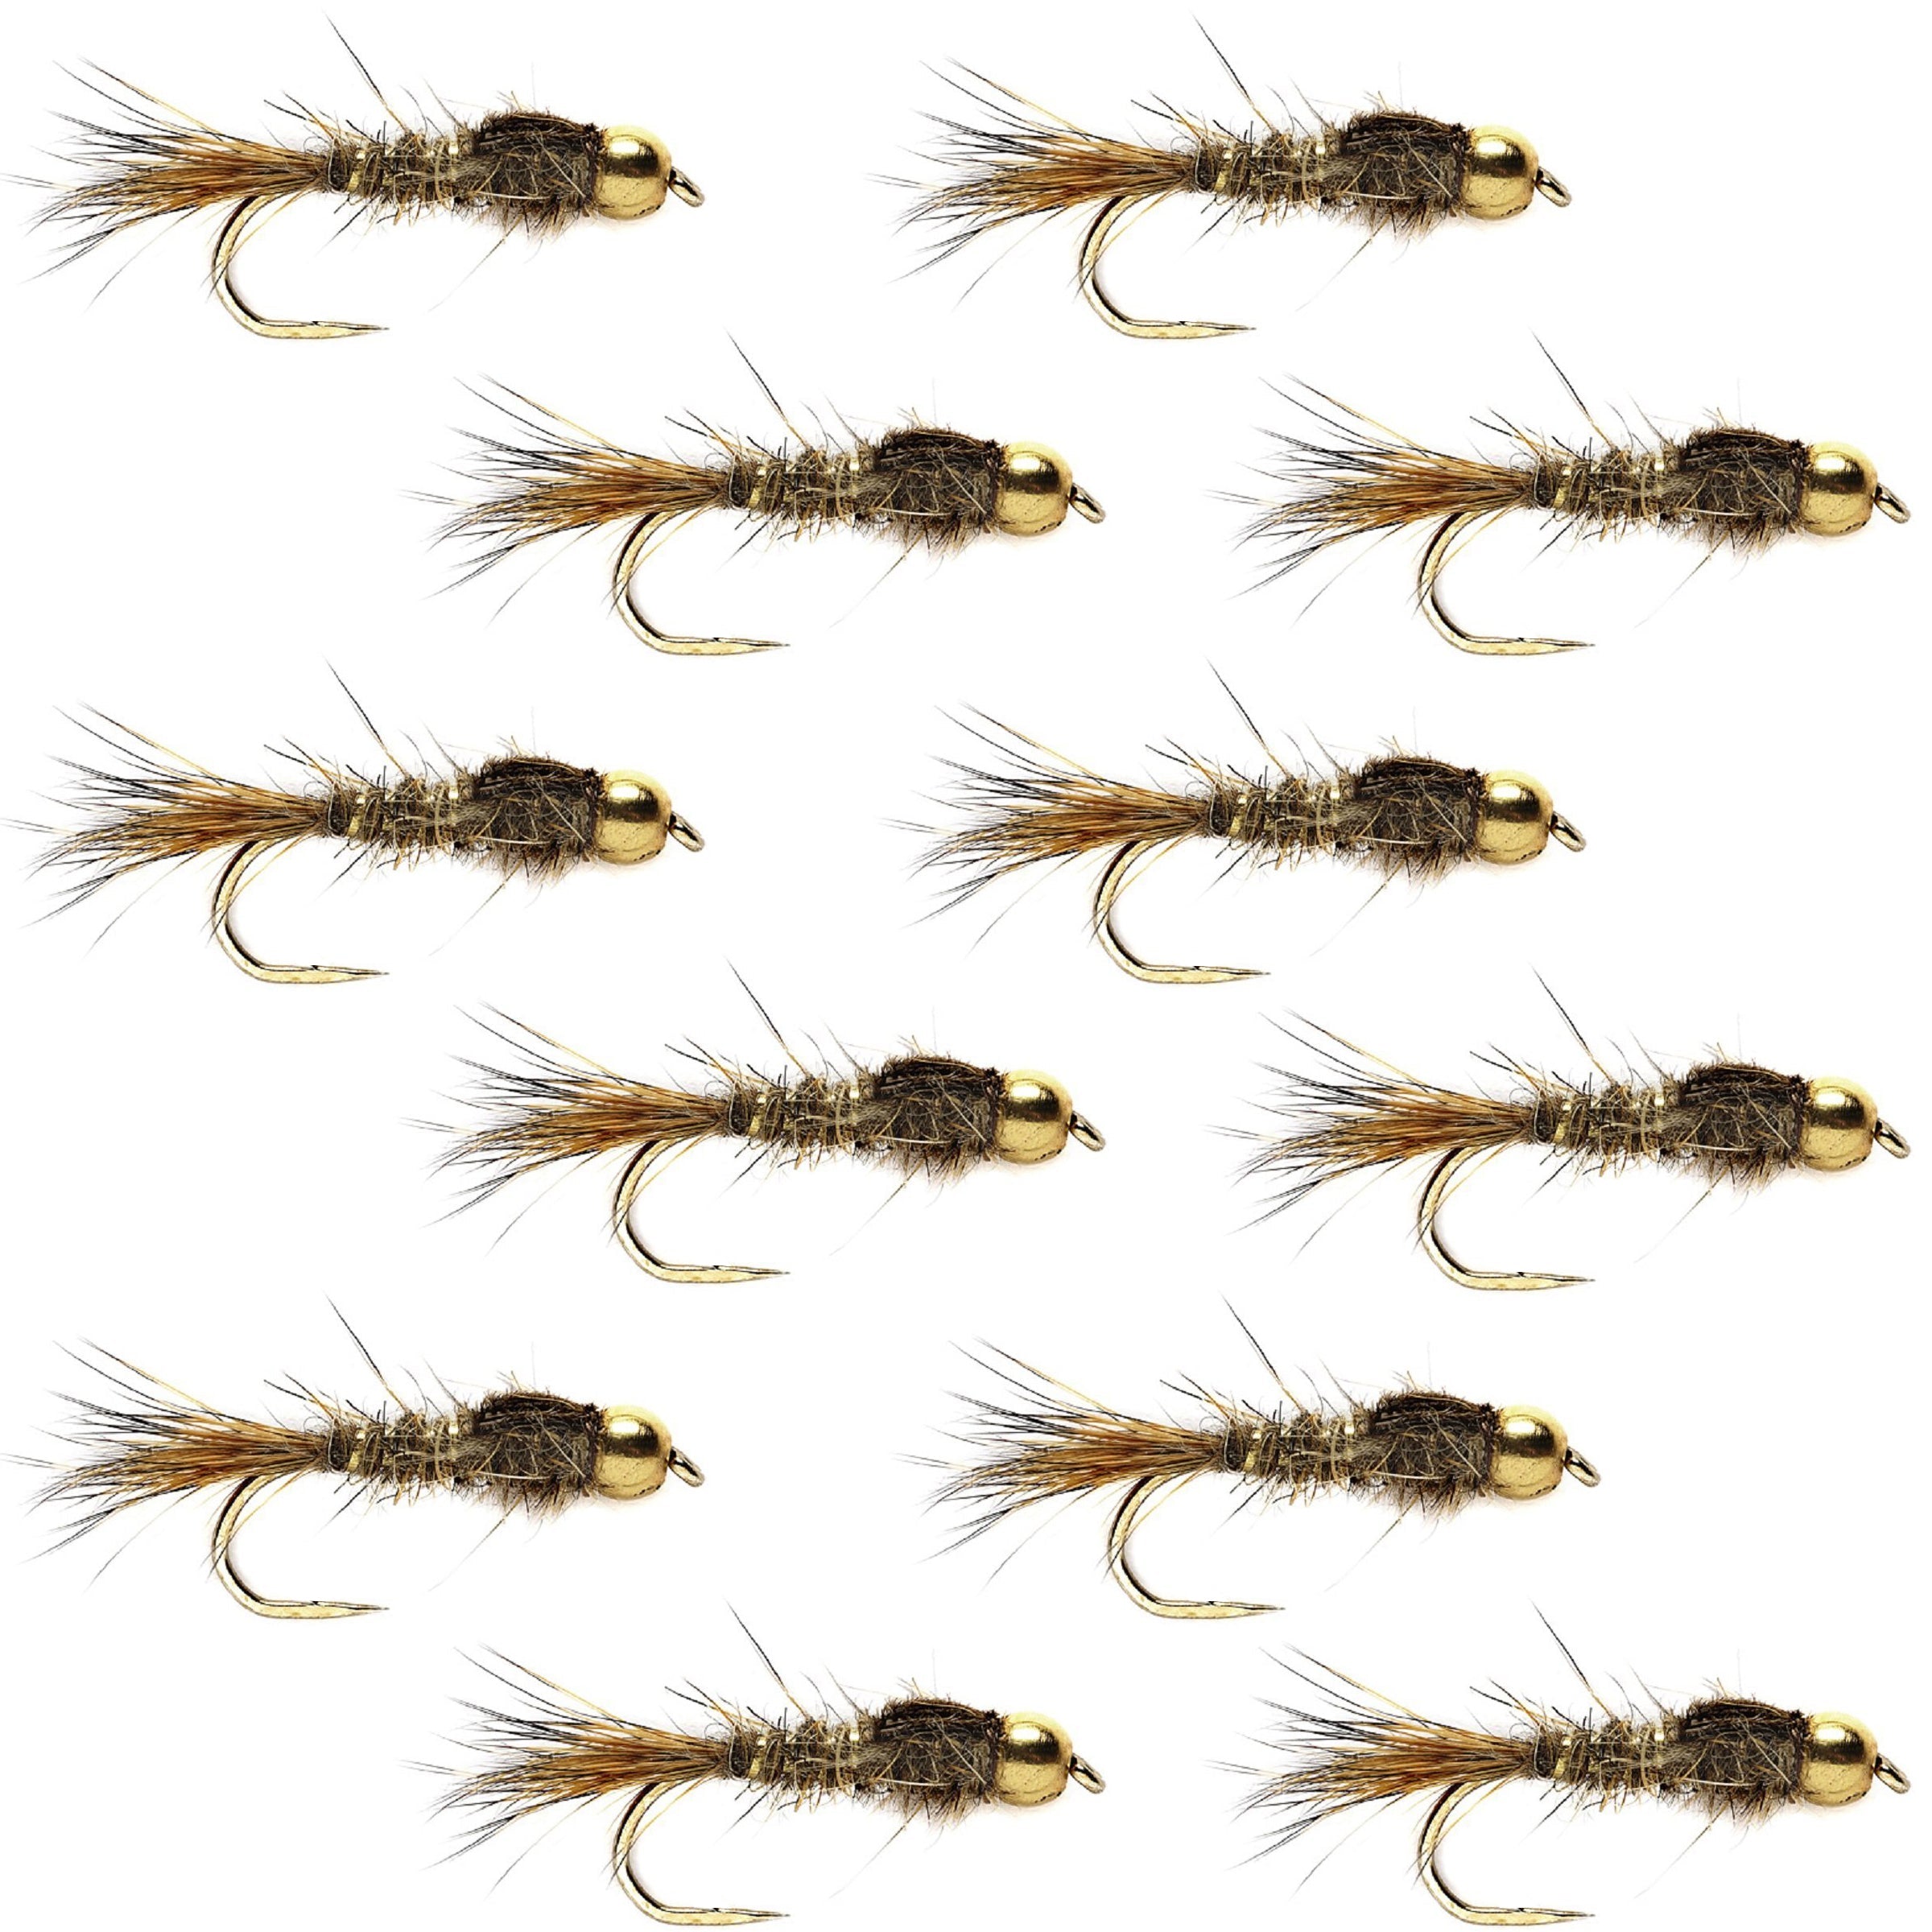 Barbless Bead Head Gold Ribbed Hare's Ear Nymph 1 Dozen Flies Hook Size 14